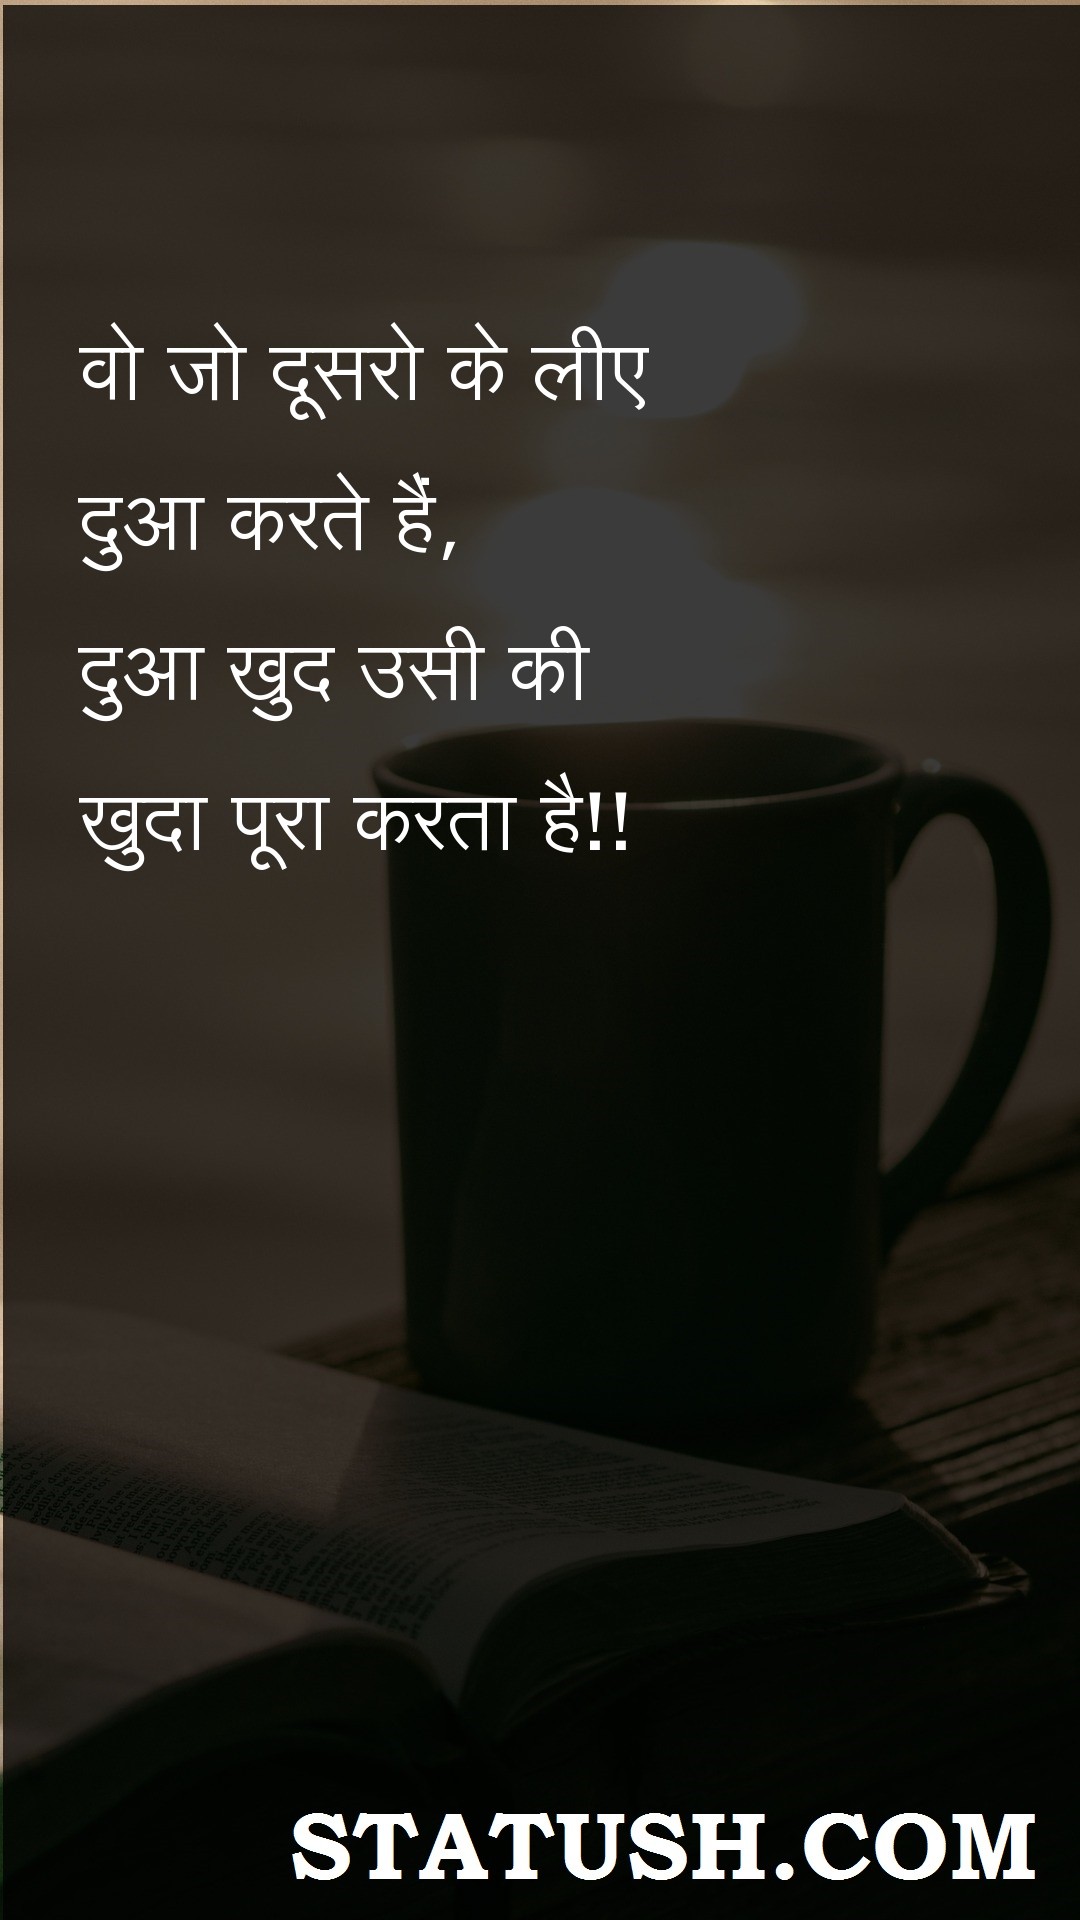 Those who pray for others - Hindi Quotes at statush.com